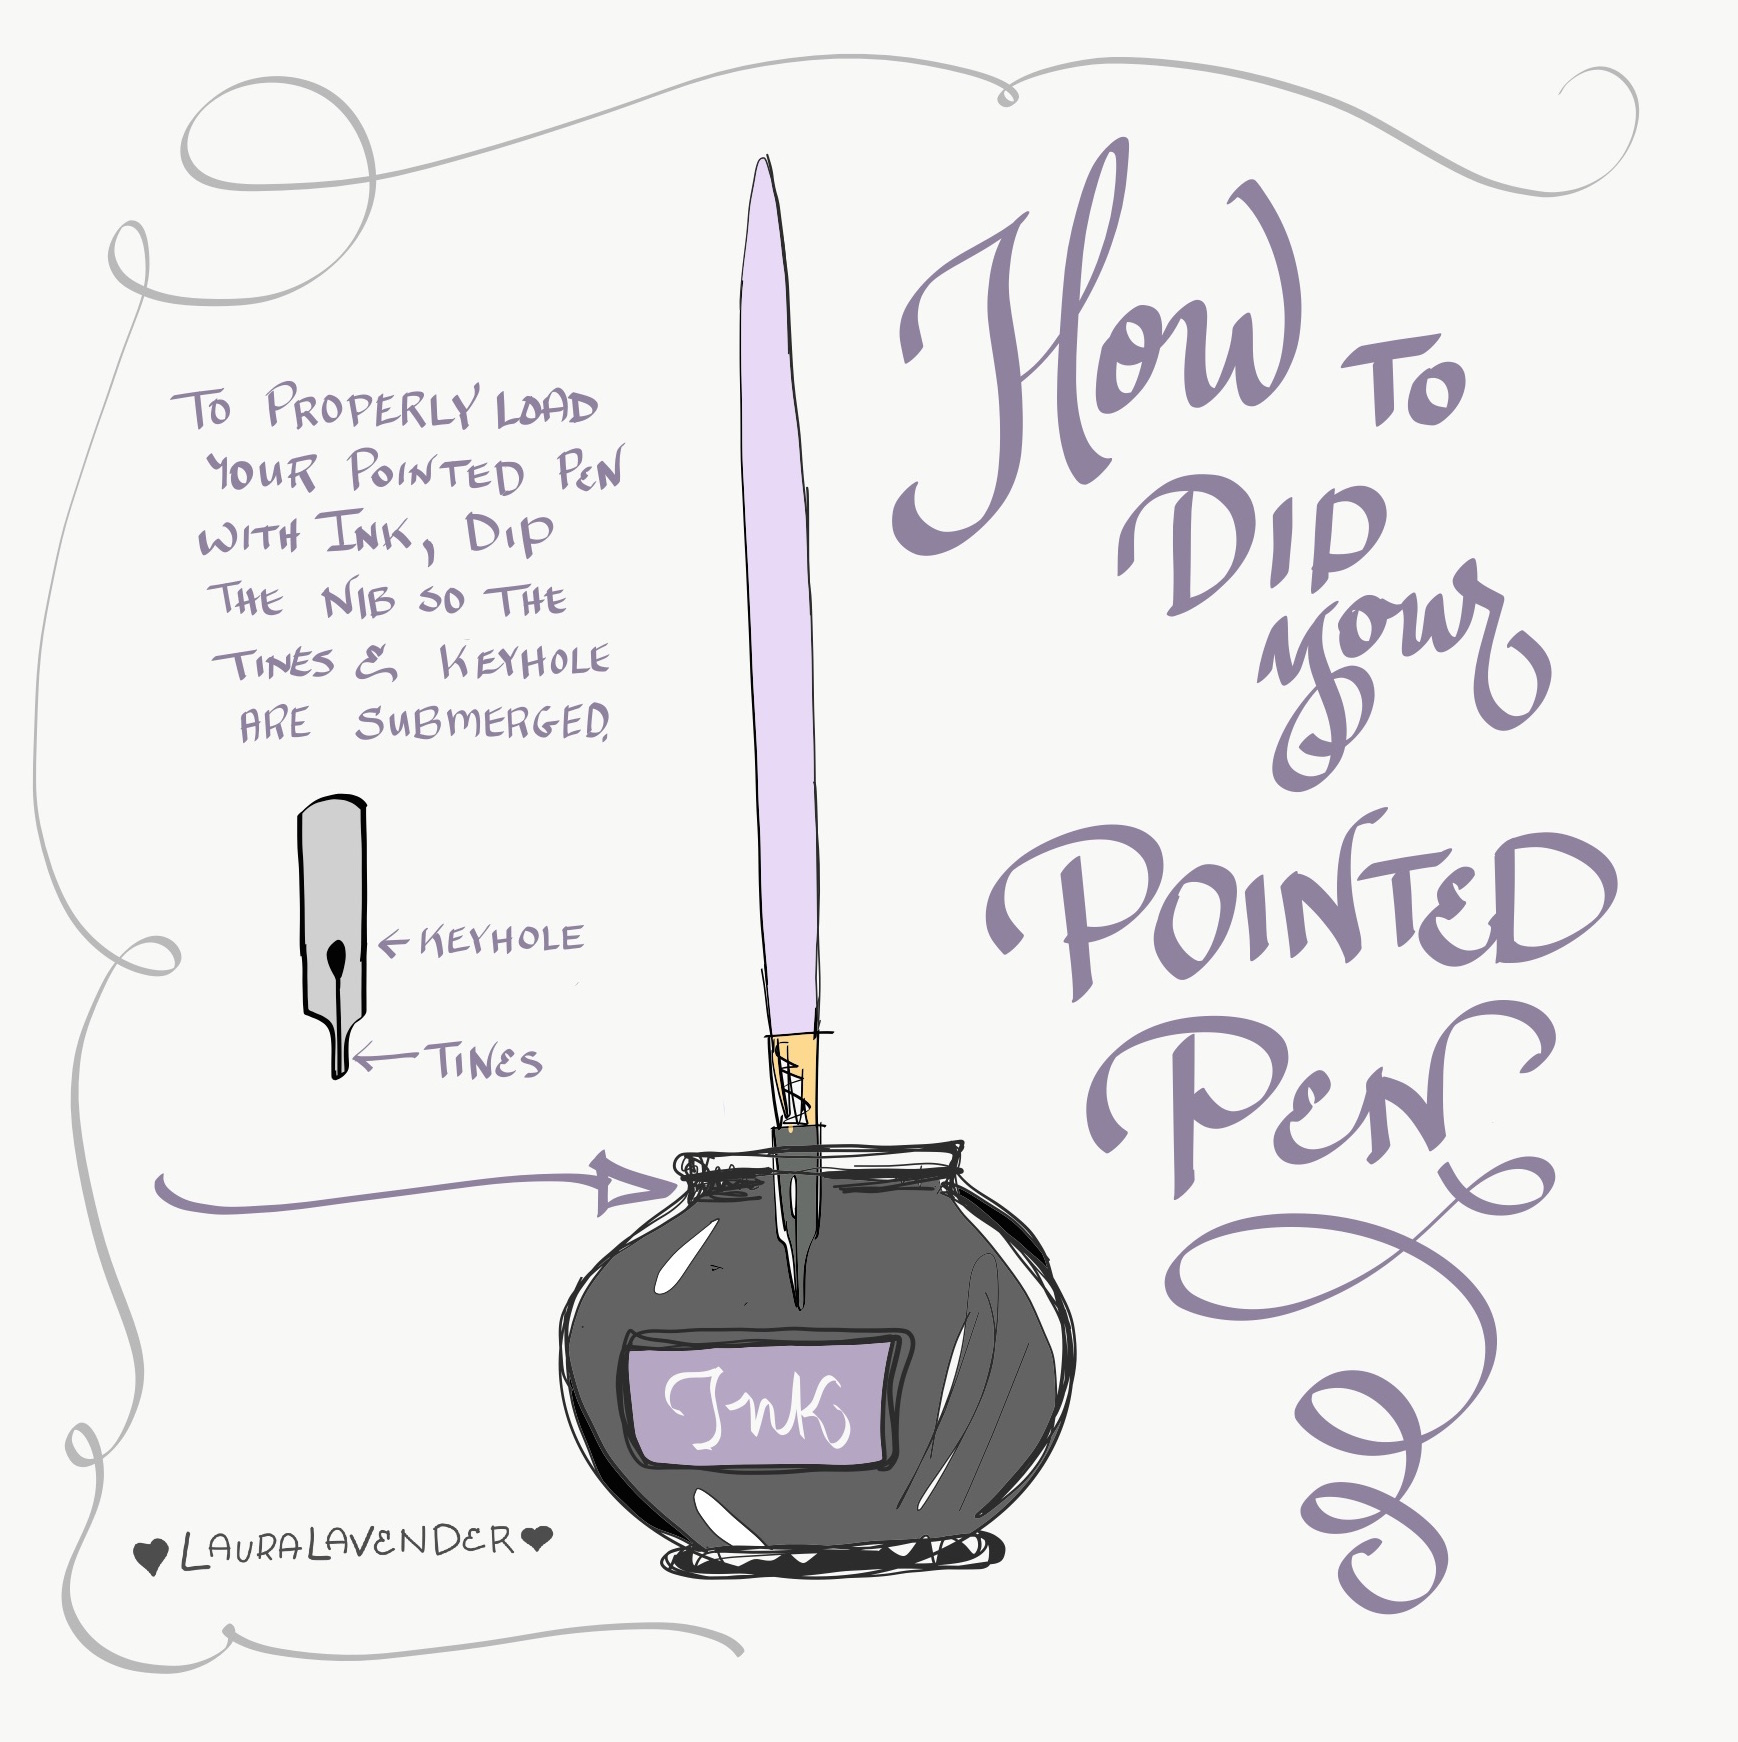 How to Dip Your Pointed Pen